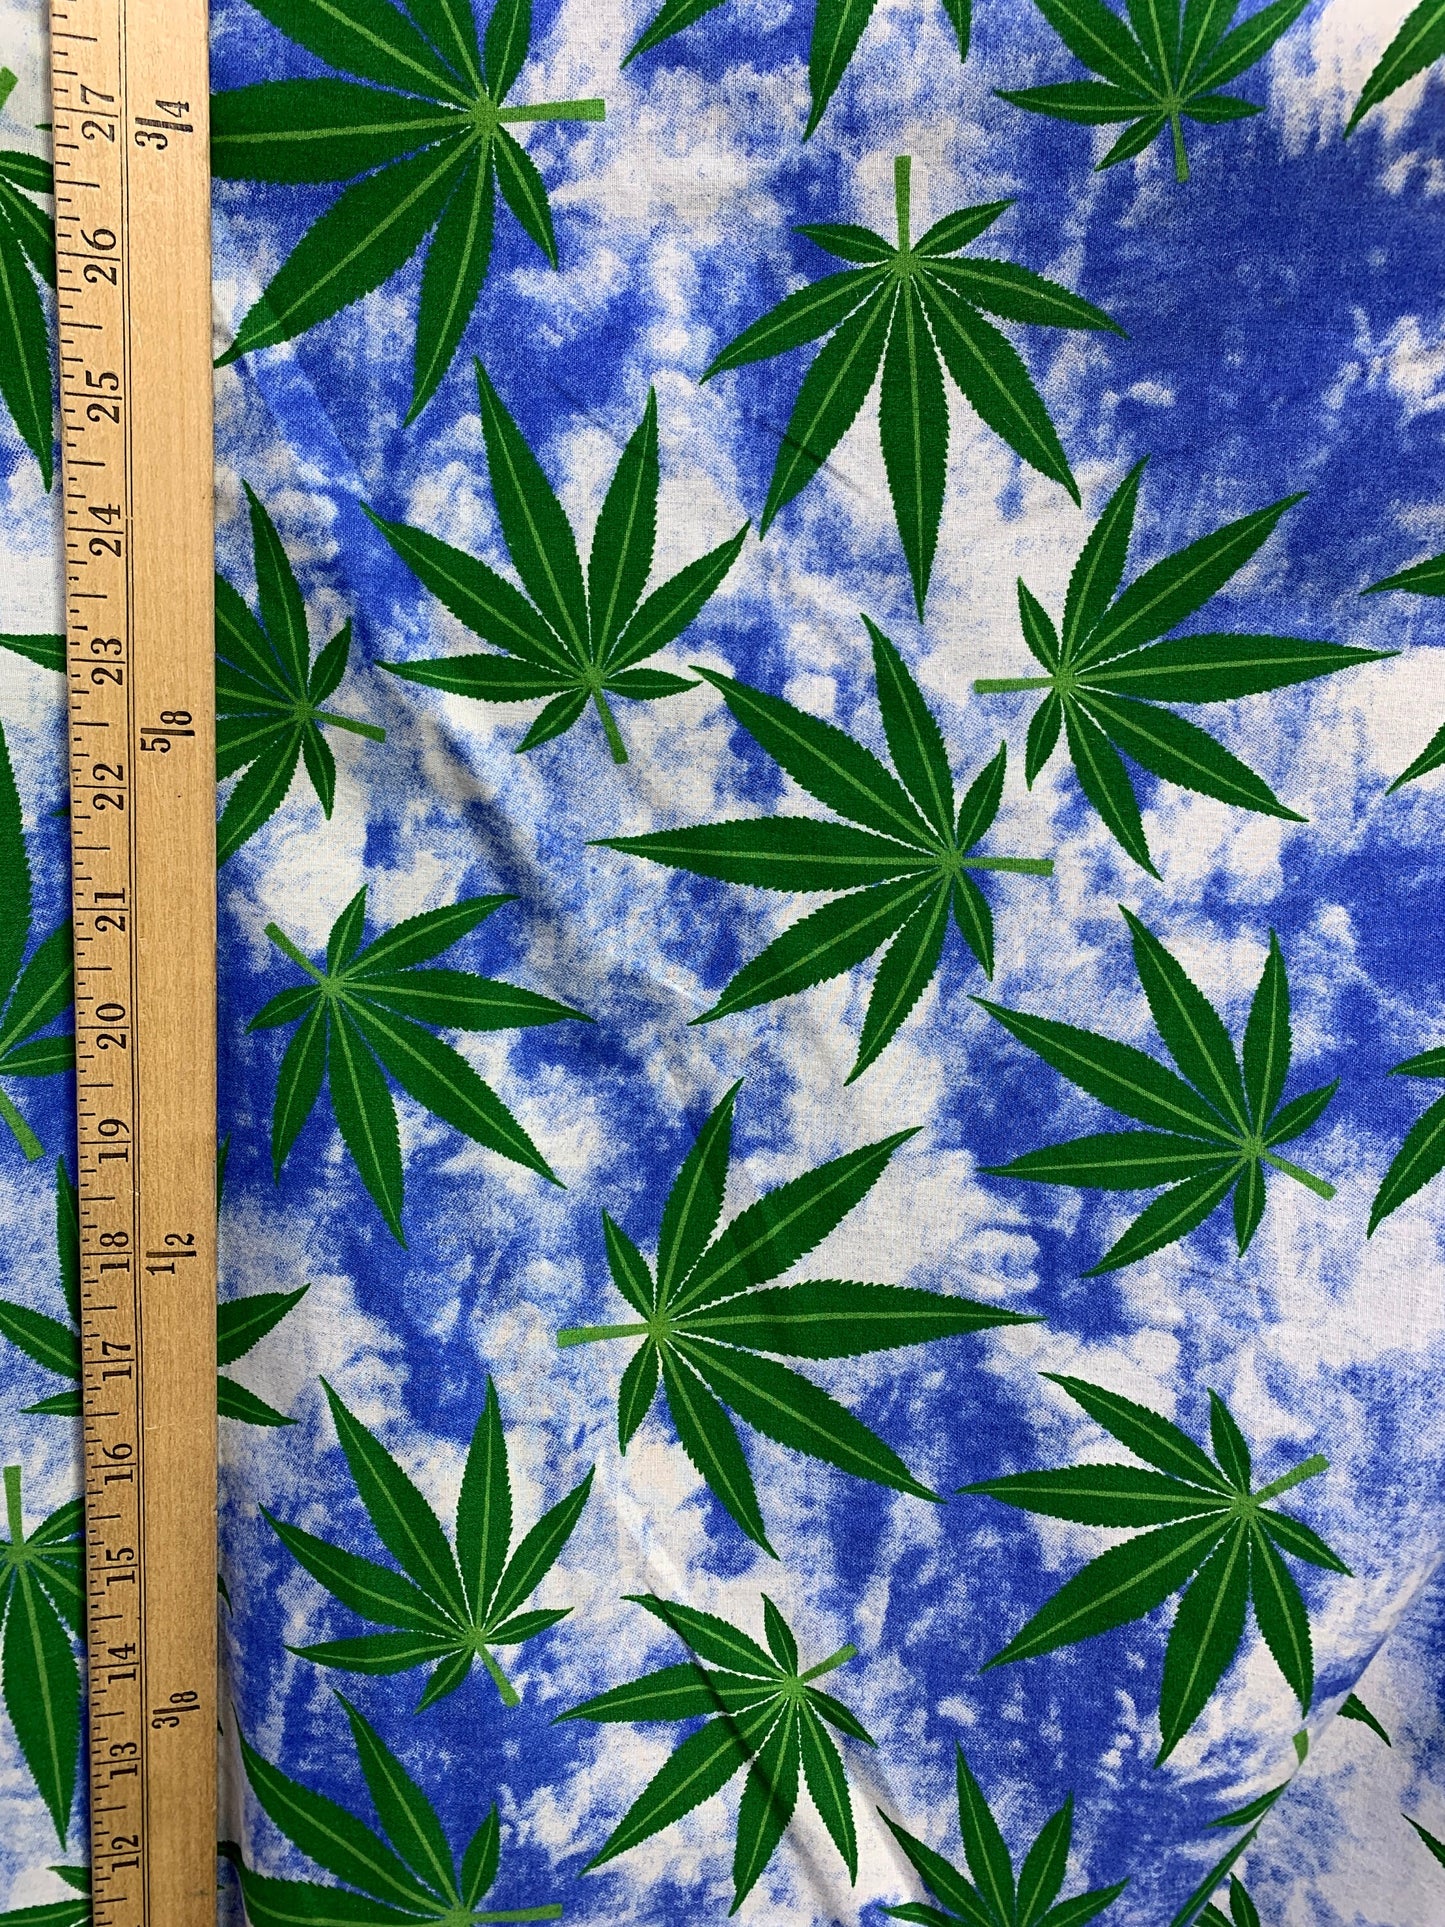 BLUE GREEN Marijuana Cannabis Leaf Printed Poly Cotton Fabric (58 in.) Sold By The Yard